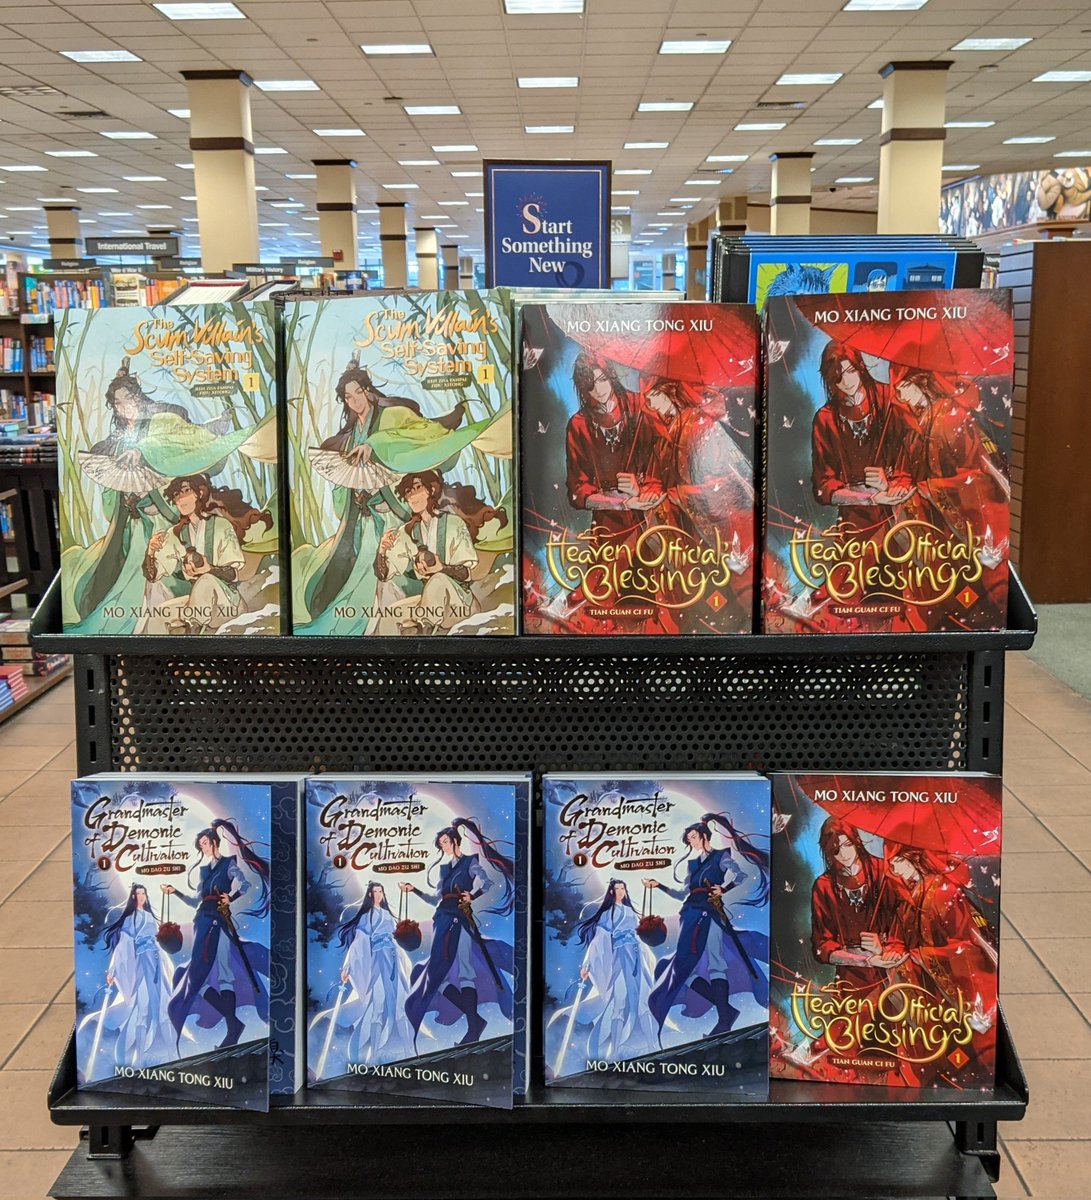 First thing you see as you walk in to my nearest B&N! #mxtxbkstore Still can't believe these are real!